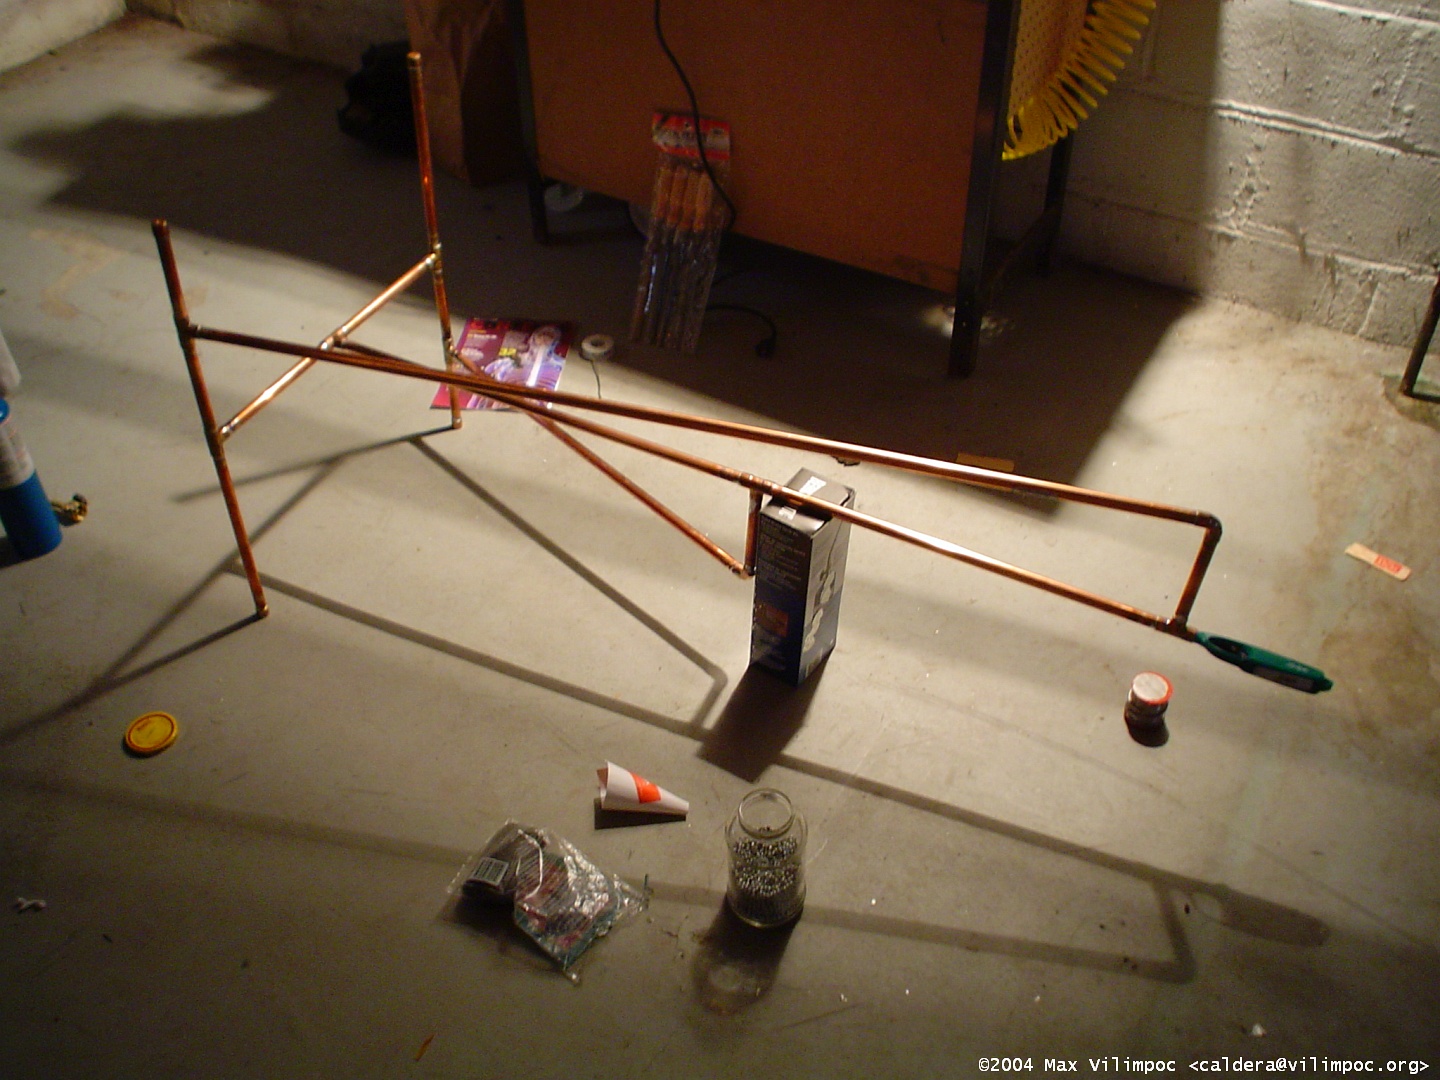 The full stand being soldered togehter in the basement, there were some added diagonal supports built with tubing added to reinforce the main vertical tube